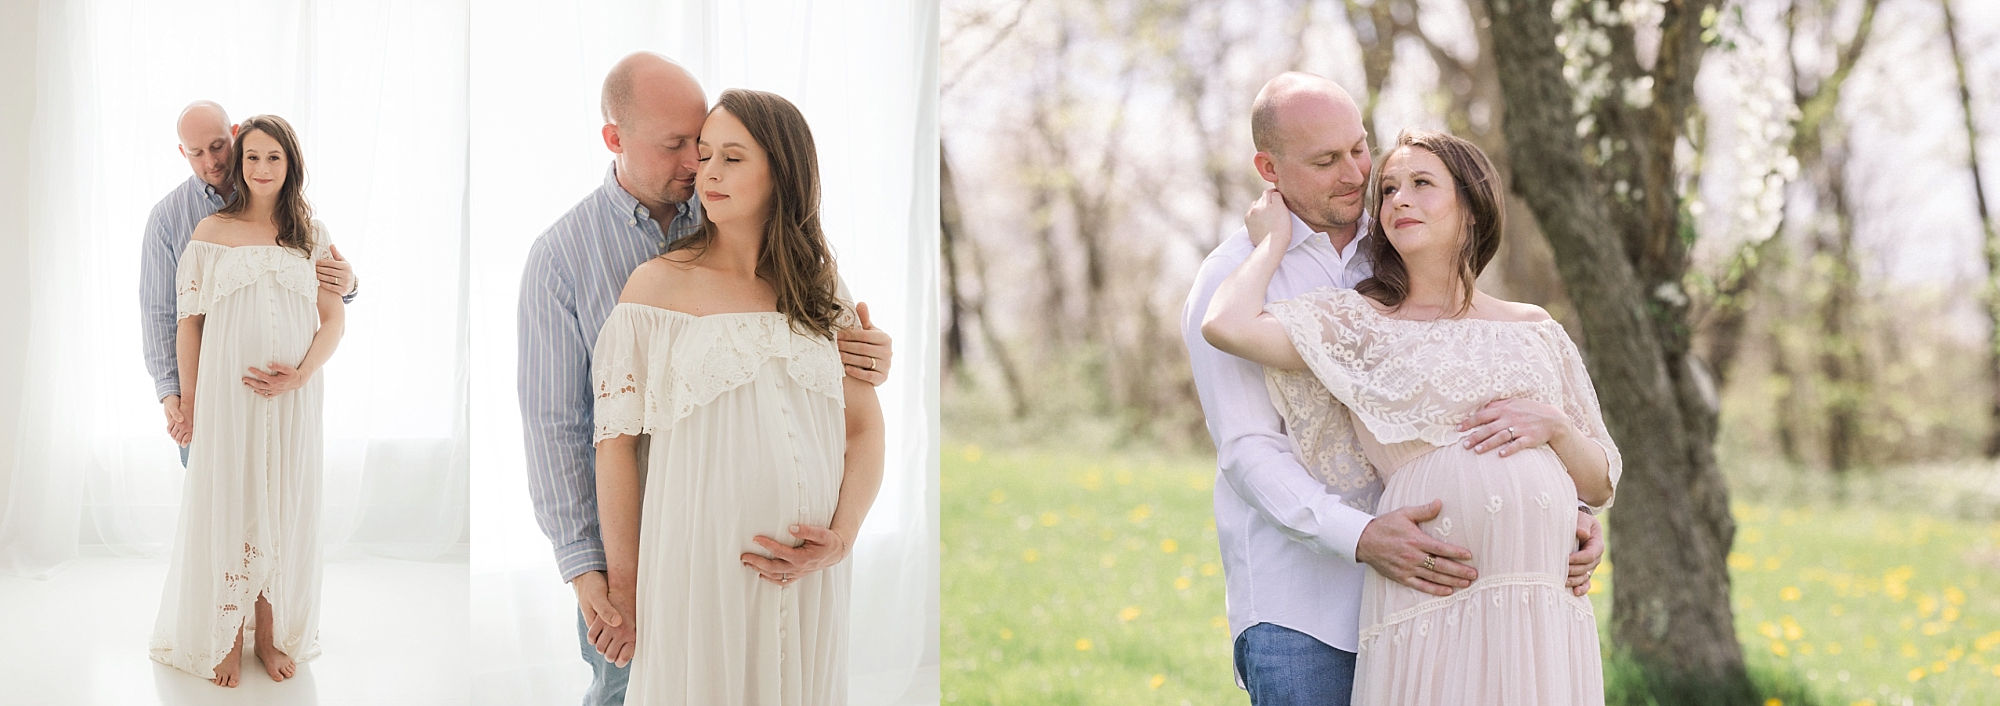 expecting parents during professional pictures 